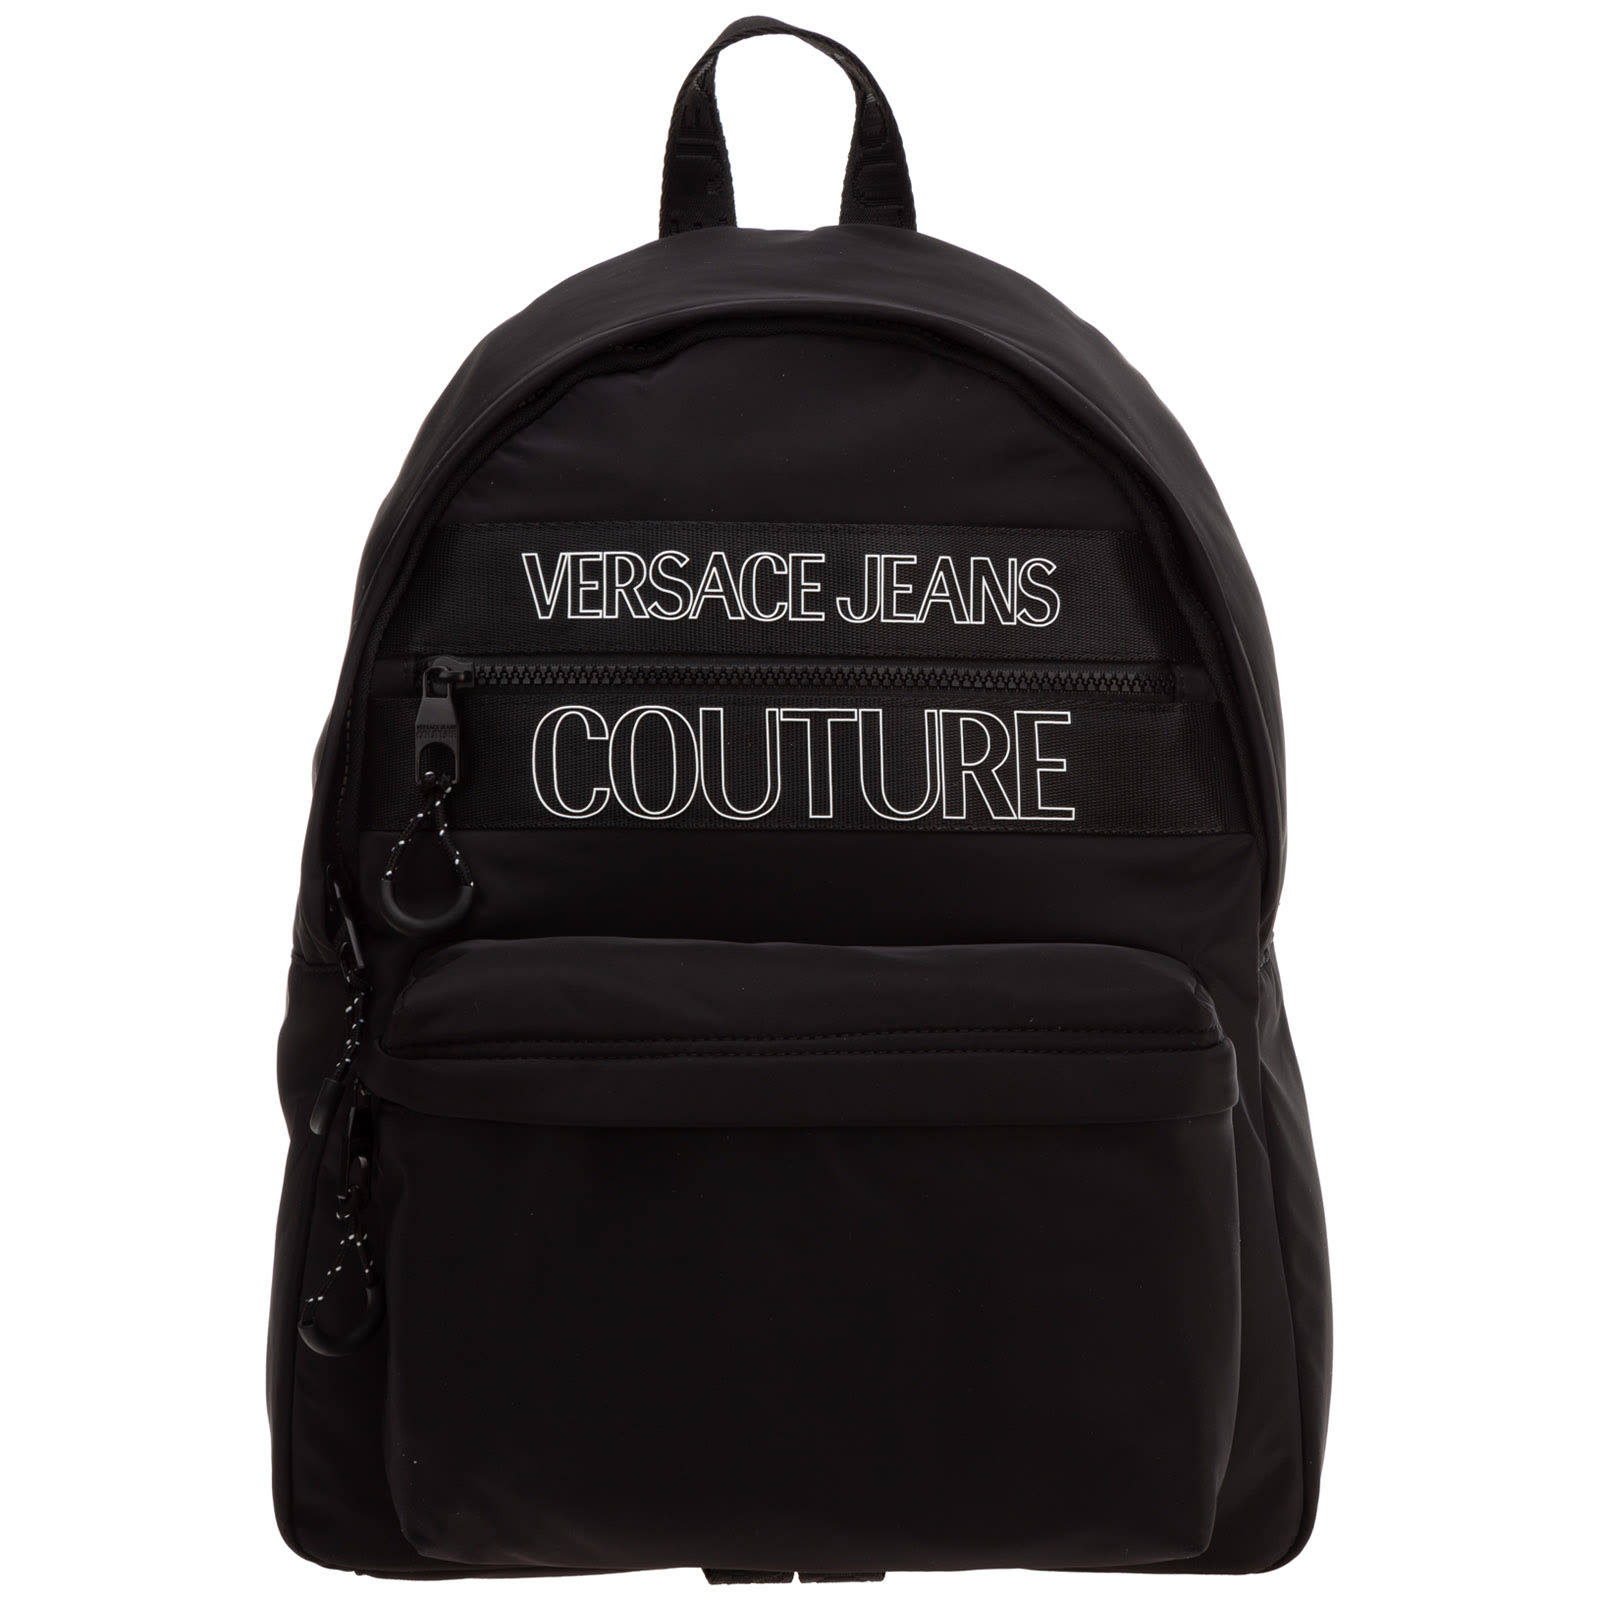 Versace Jeans Couture Canada 95 Backpack